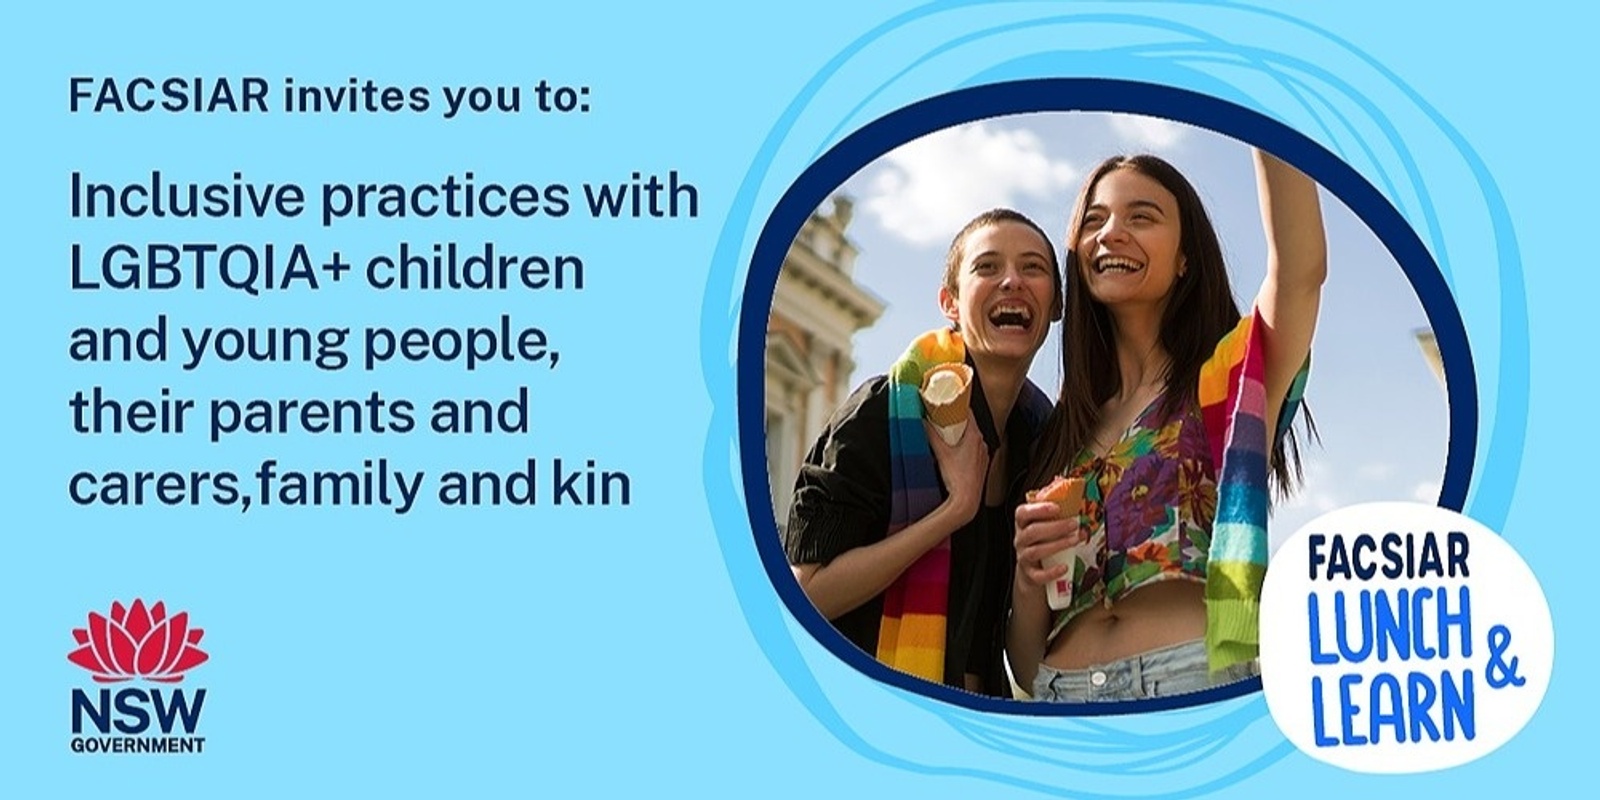 Banner image for FACSIAR Lunch and Learn: Inclusive practices with LGBTQIA+ children and young people, their parents and carers, family and kin